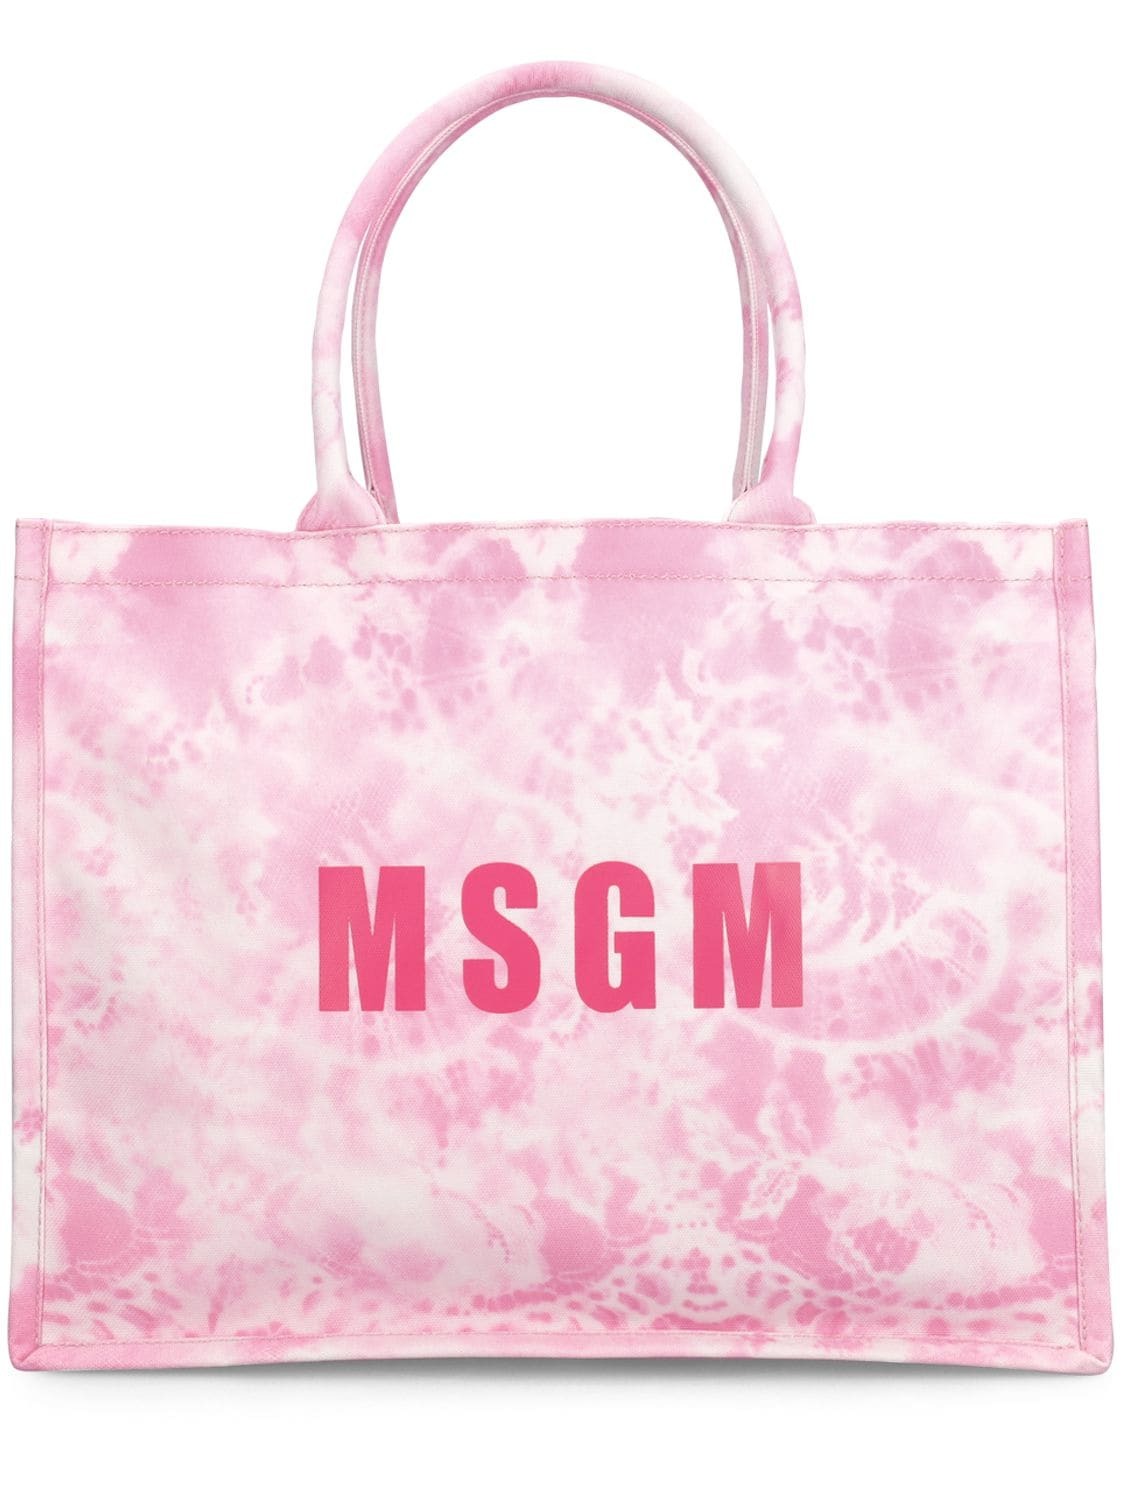 MSGM Large Tie Dye Canvas Tote Bag in pink